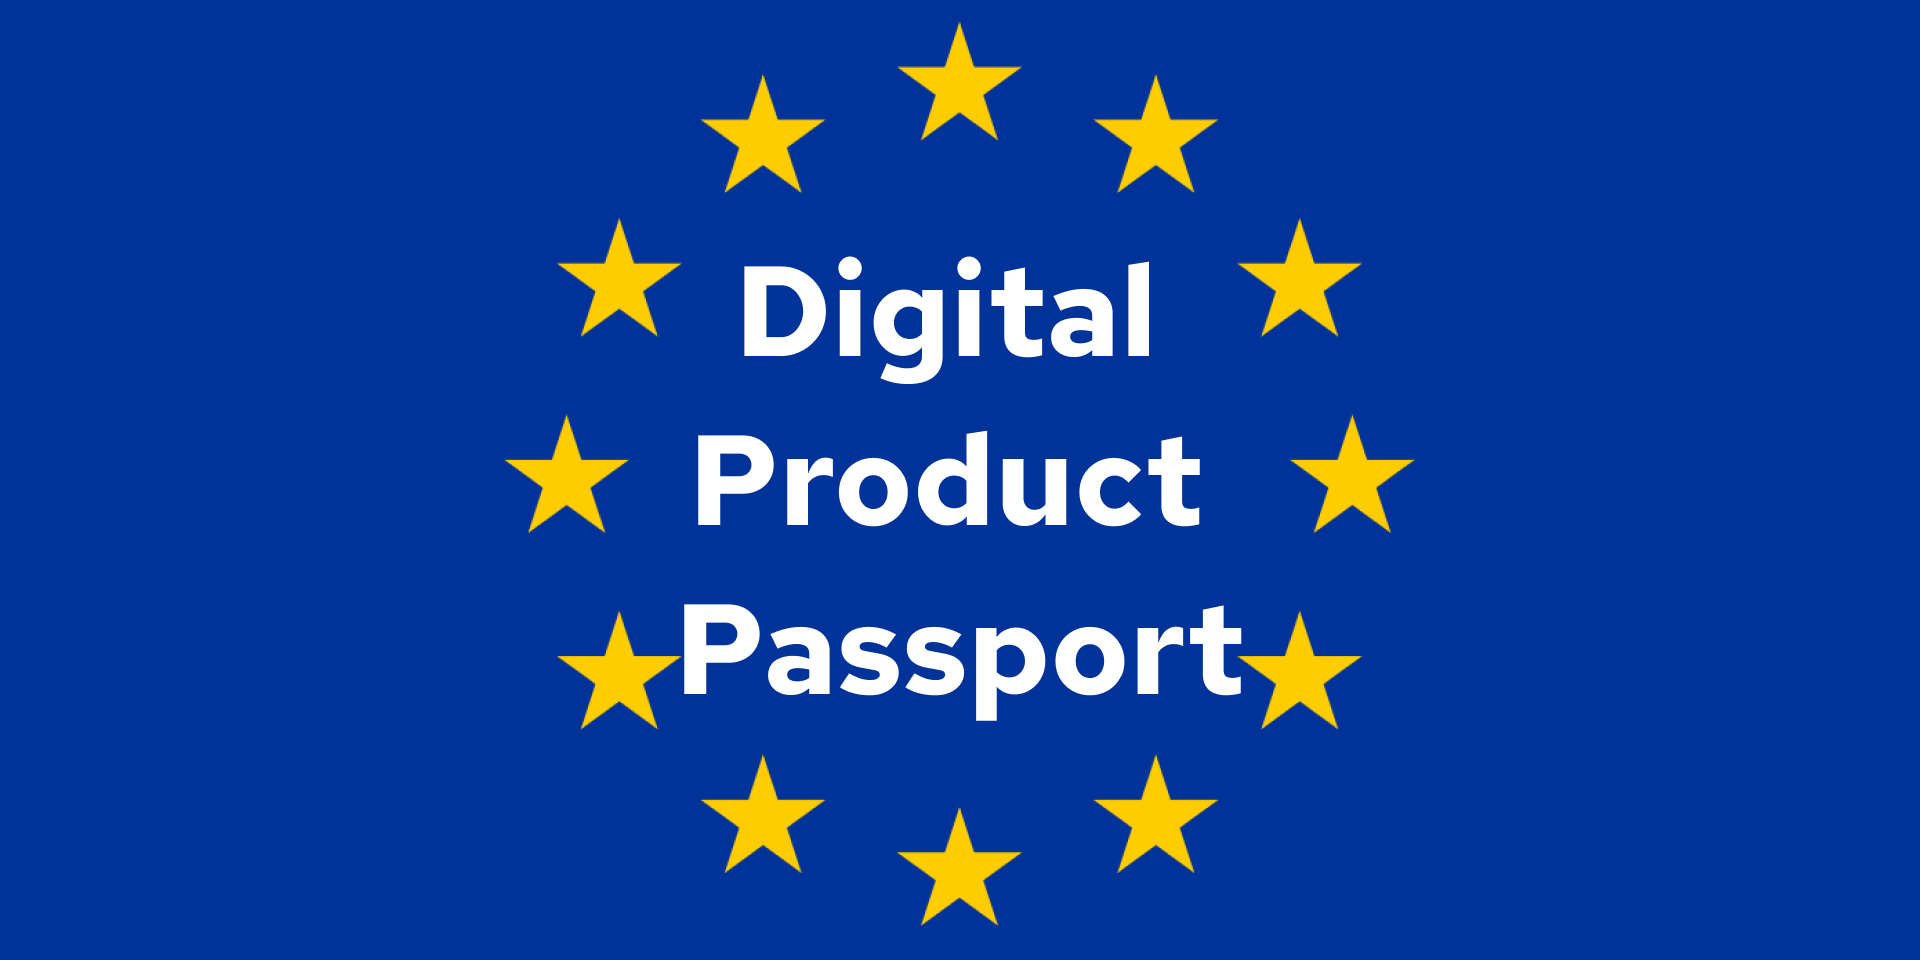 Who needs to comply with Digital Product Passport?